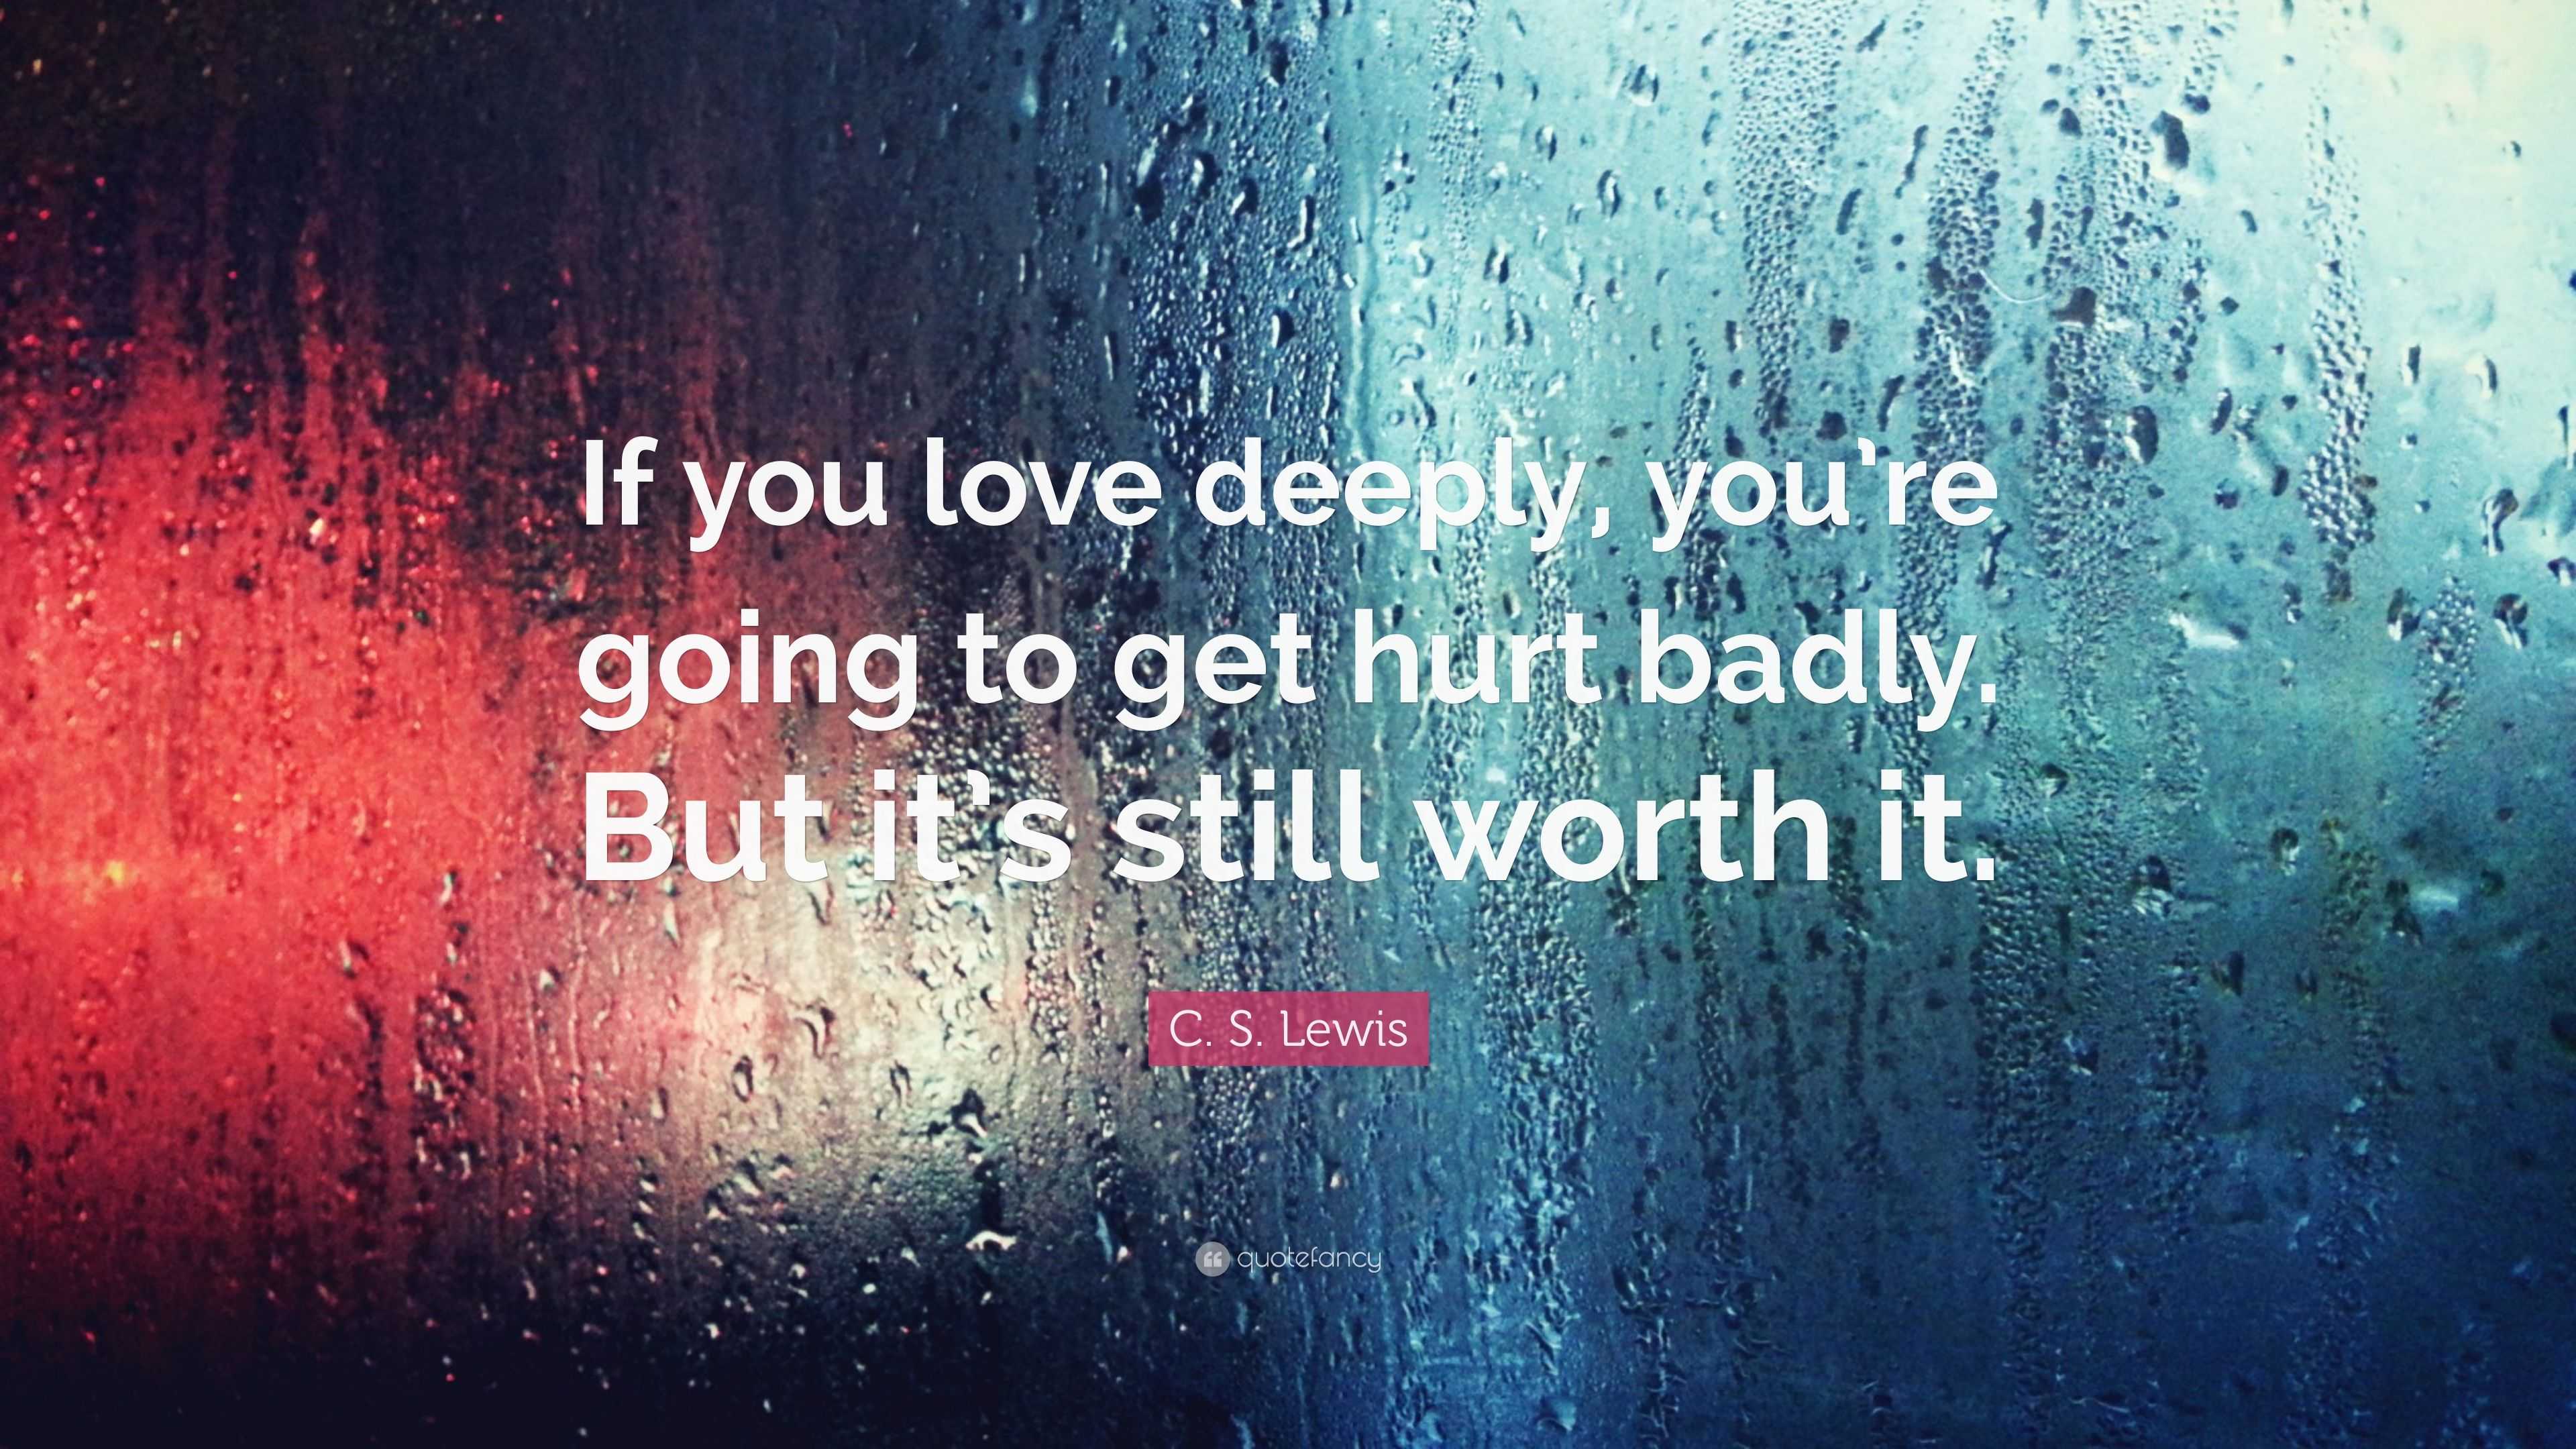 C. S. Lewis Quote: “If you love deeply, you’re going to get hurt badly